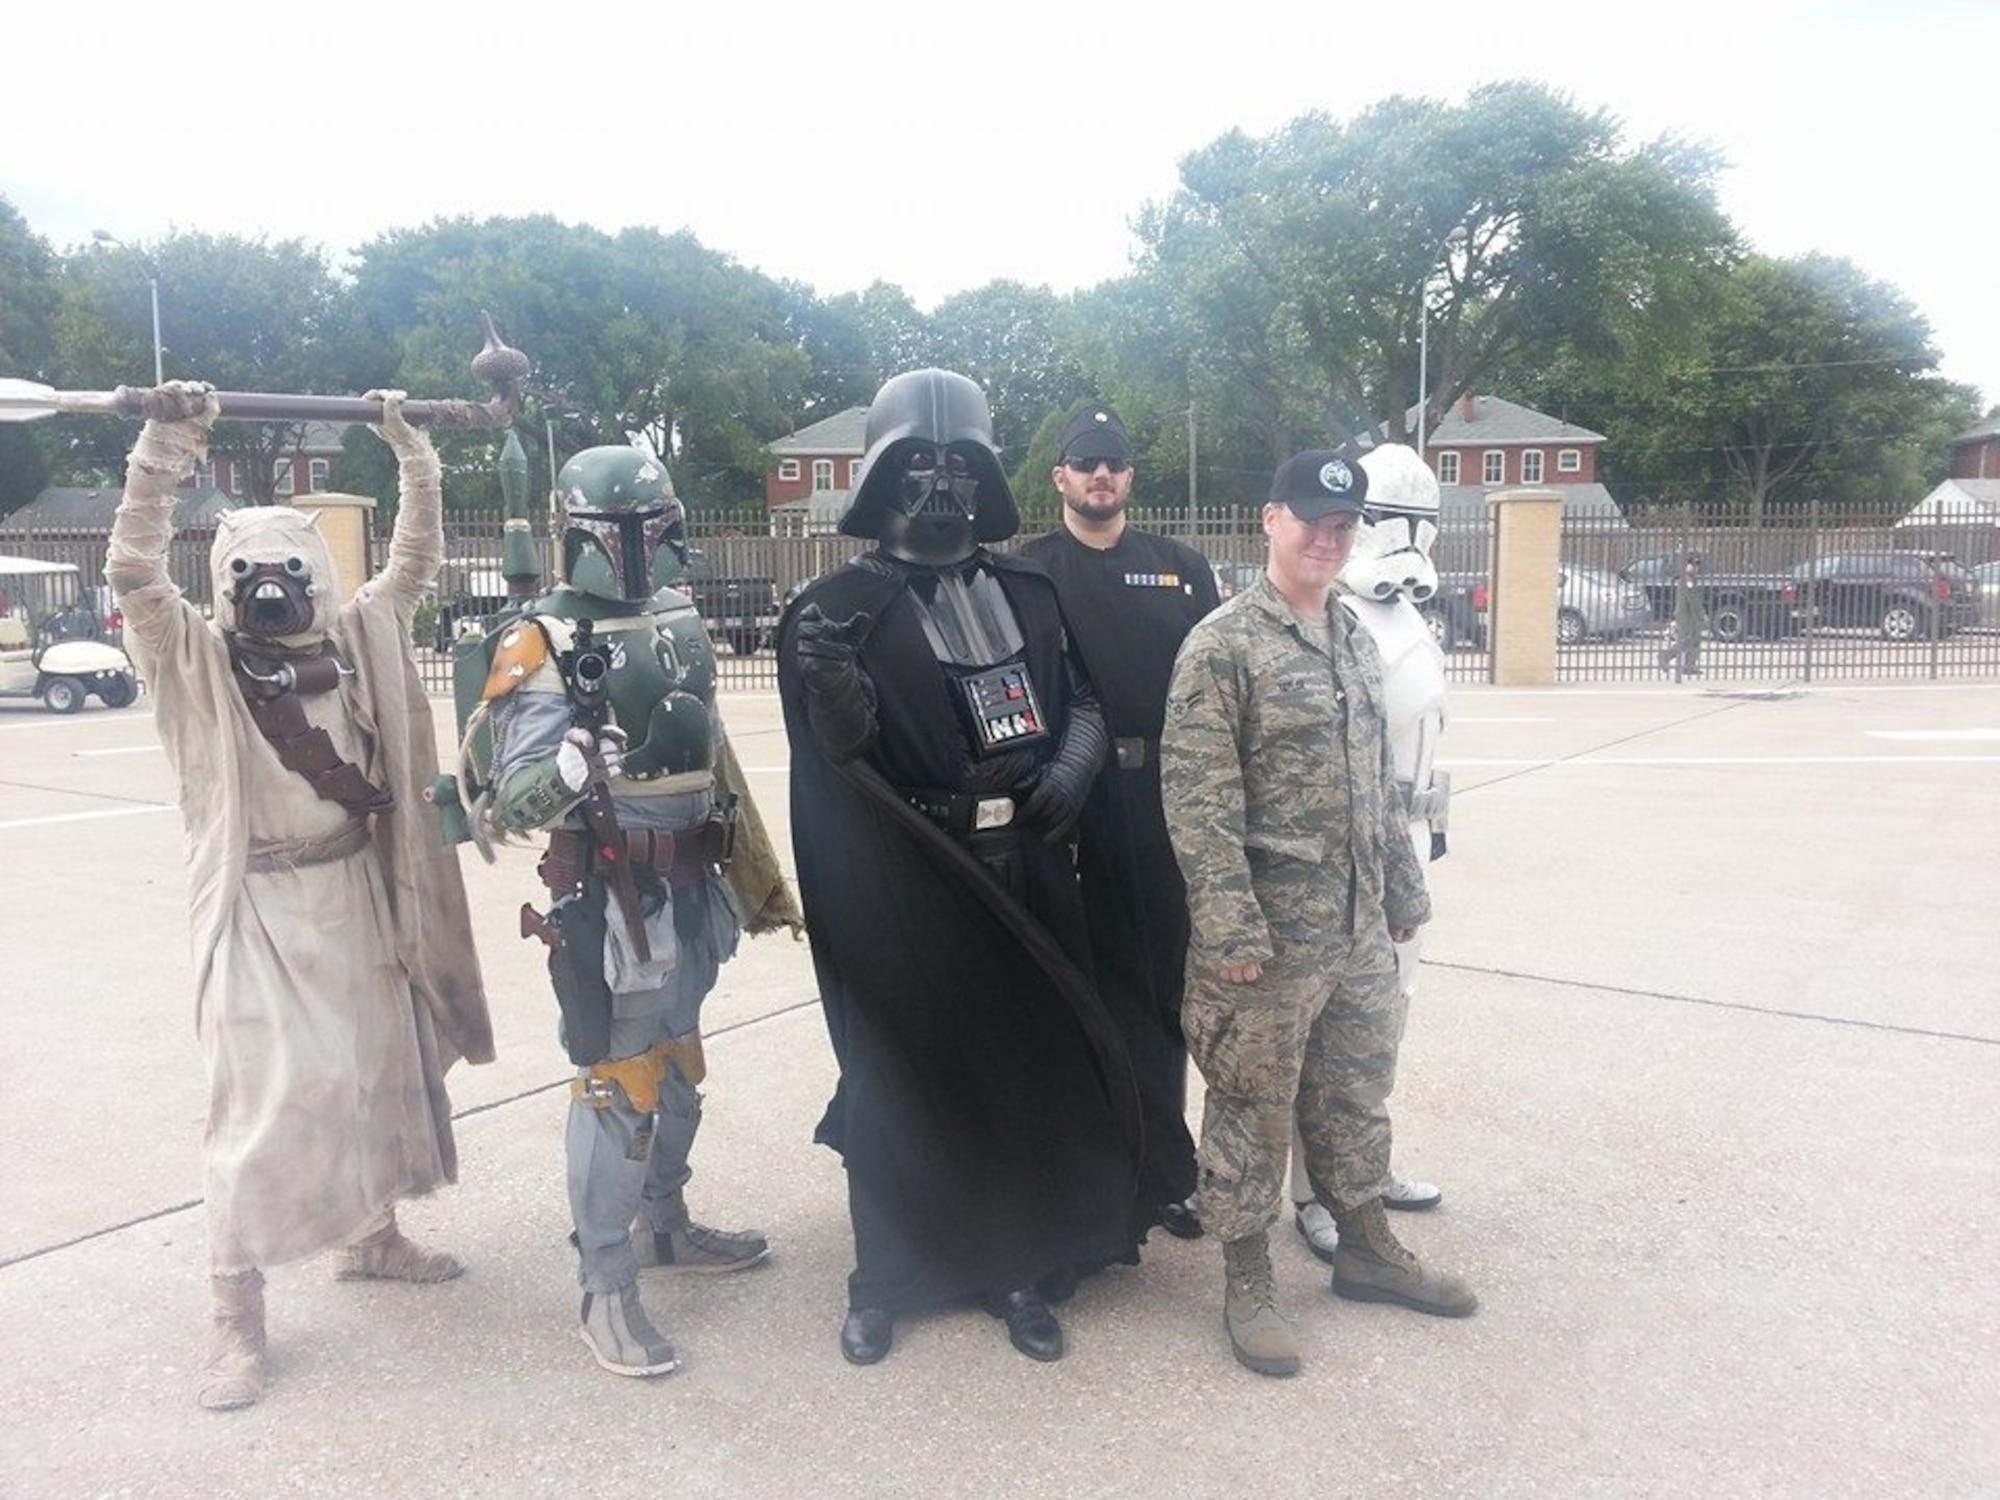 U.S. Air Force Airman 1st Class Erik Taylor, now a technical sergeant, participates as an air show staff member and takes a photo with the 501st Legion at the Offutt Air Force Base Air Show, Offutt AFB, Nebraska, 2015.